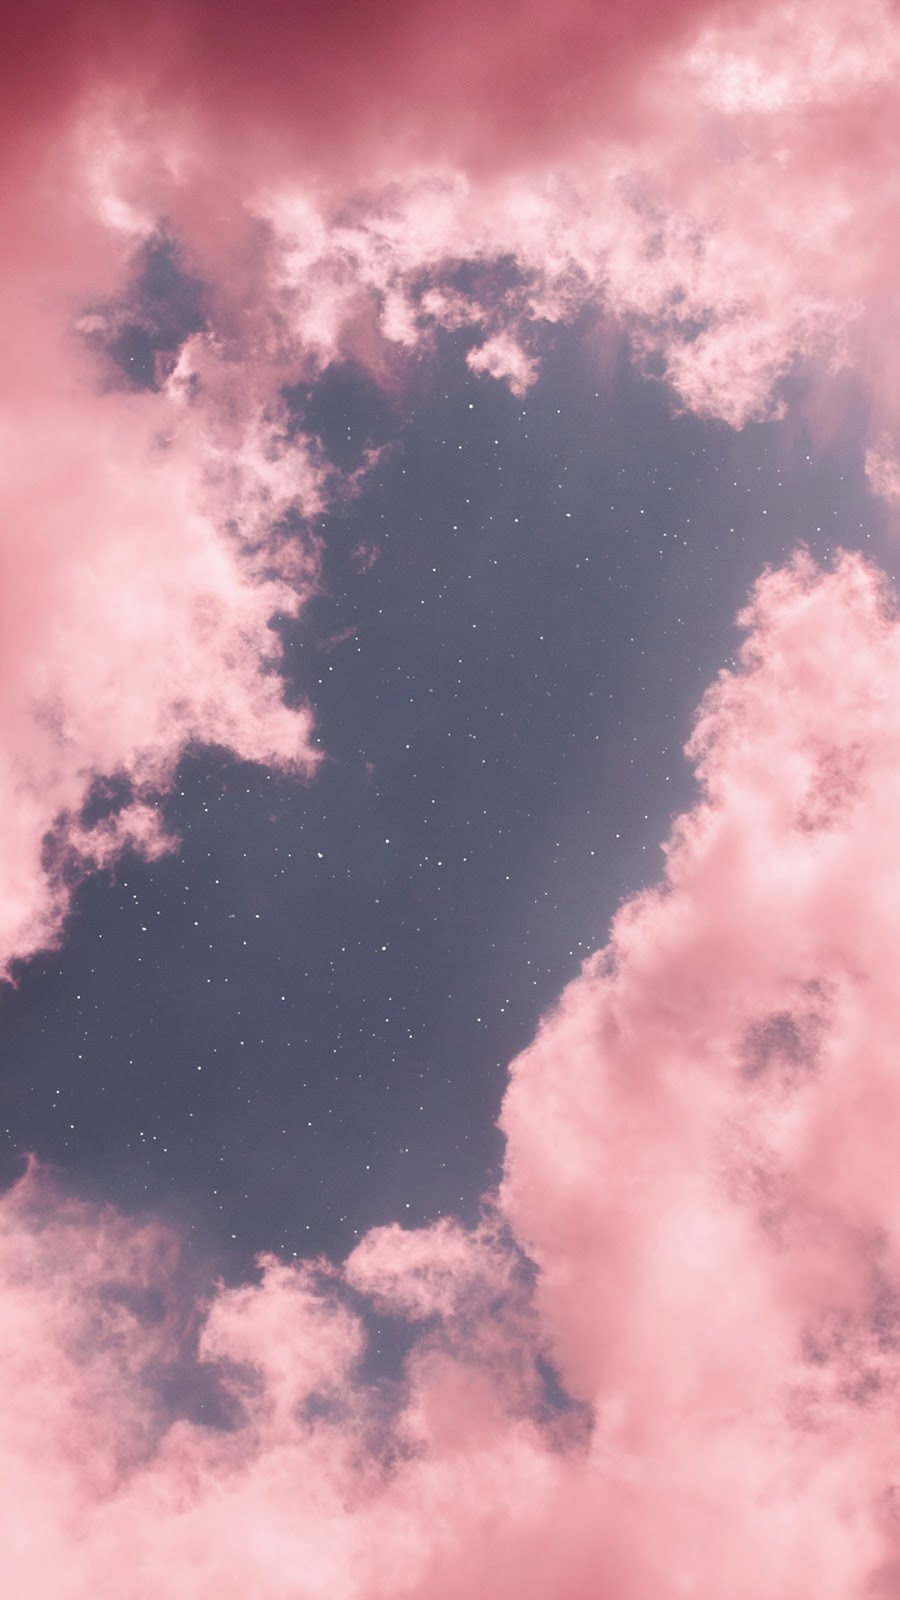 Pink Clouds Wallpaper Aesthetic Pink Cloud Painting 3096119 Hd Wallpaper Backgrounds Download